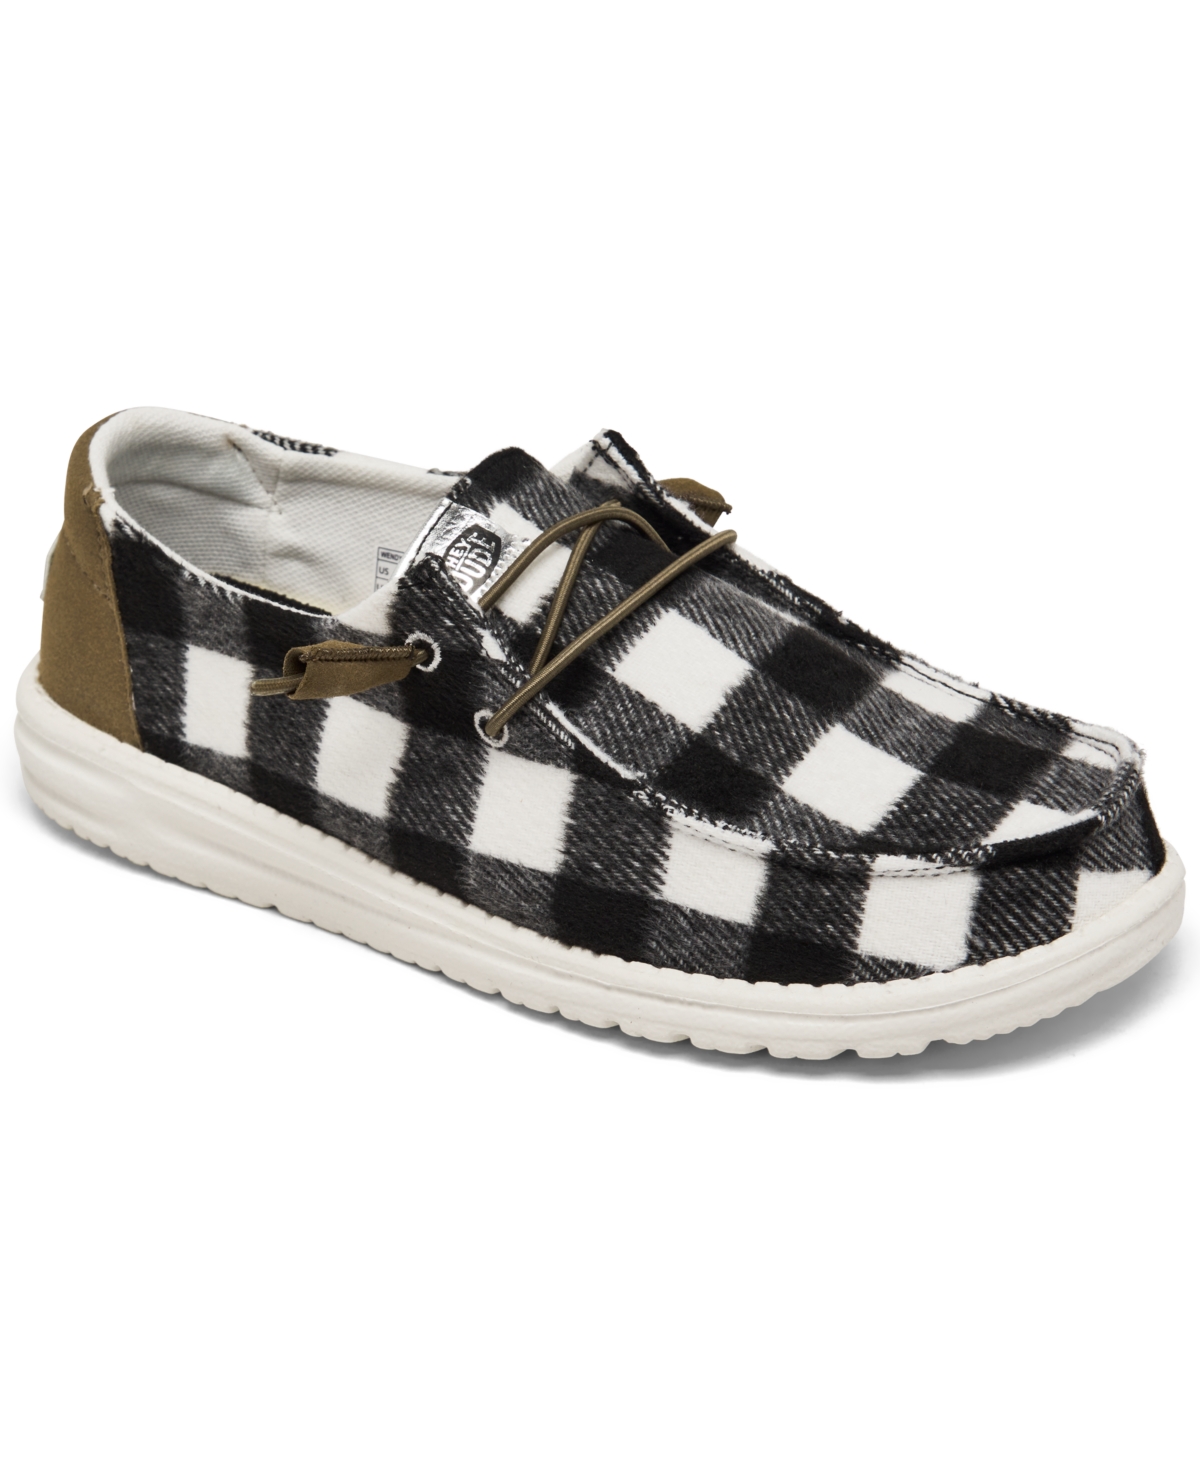 Women's Wendy Plaid Casual Sneakers from Finish Line - White, Black